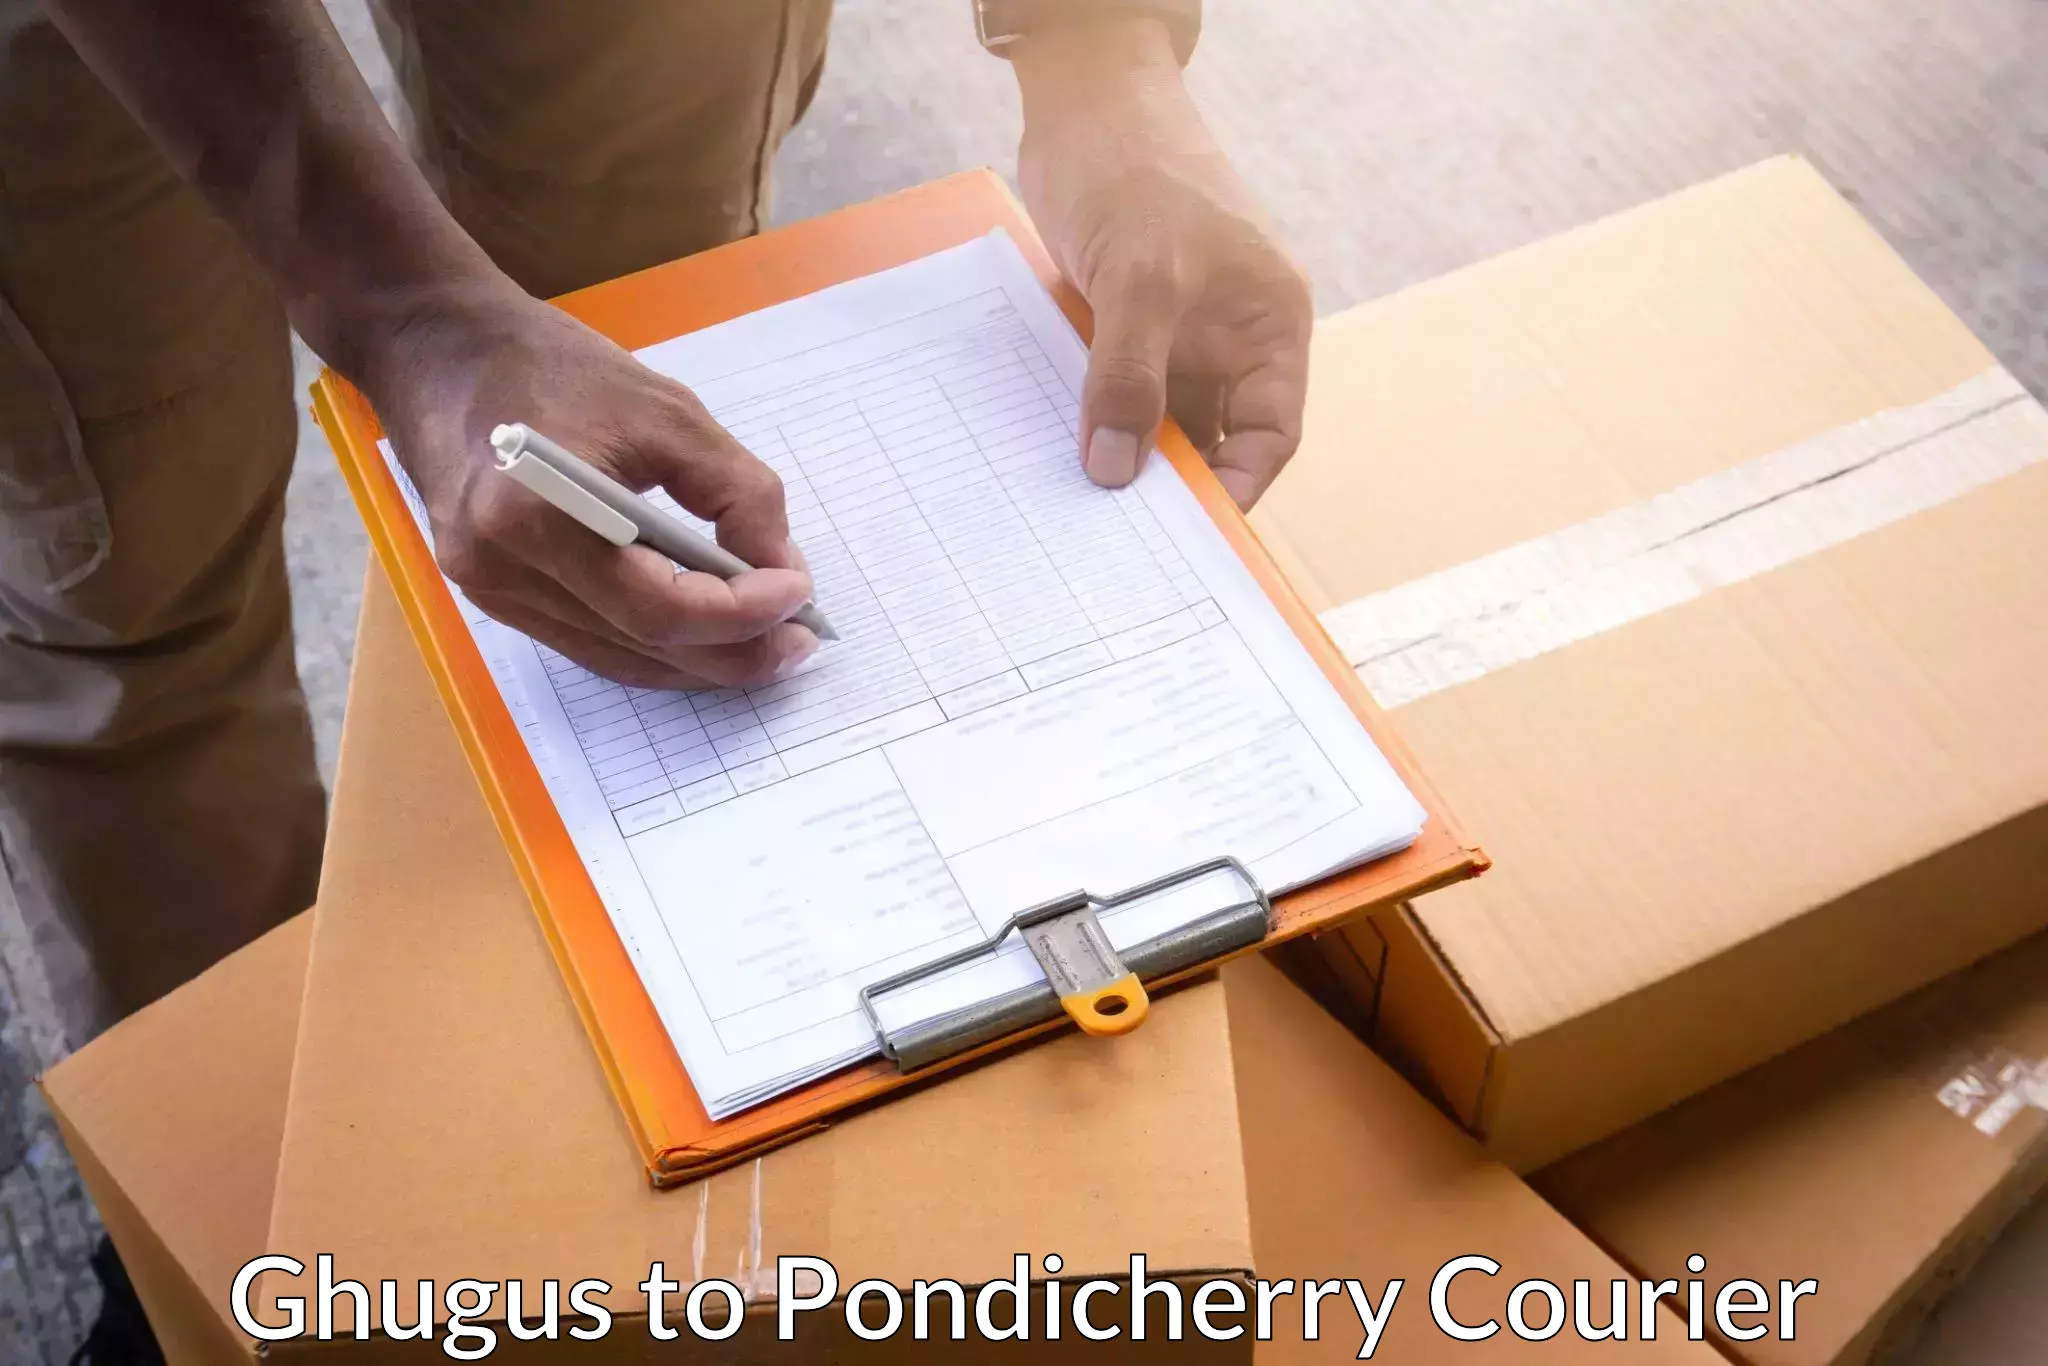 Modern delivery technologies Ghugus to Pondicherry